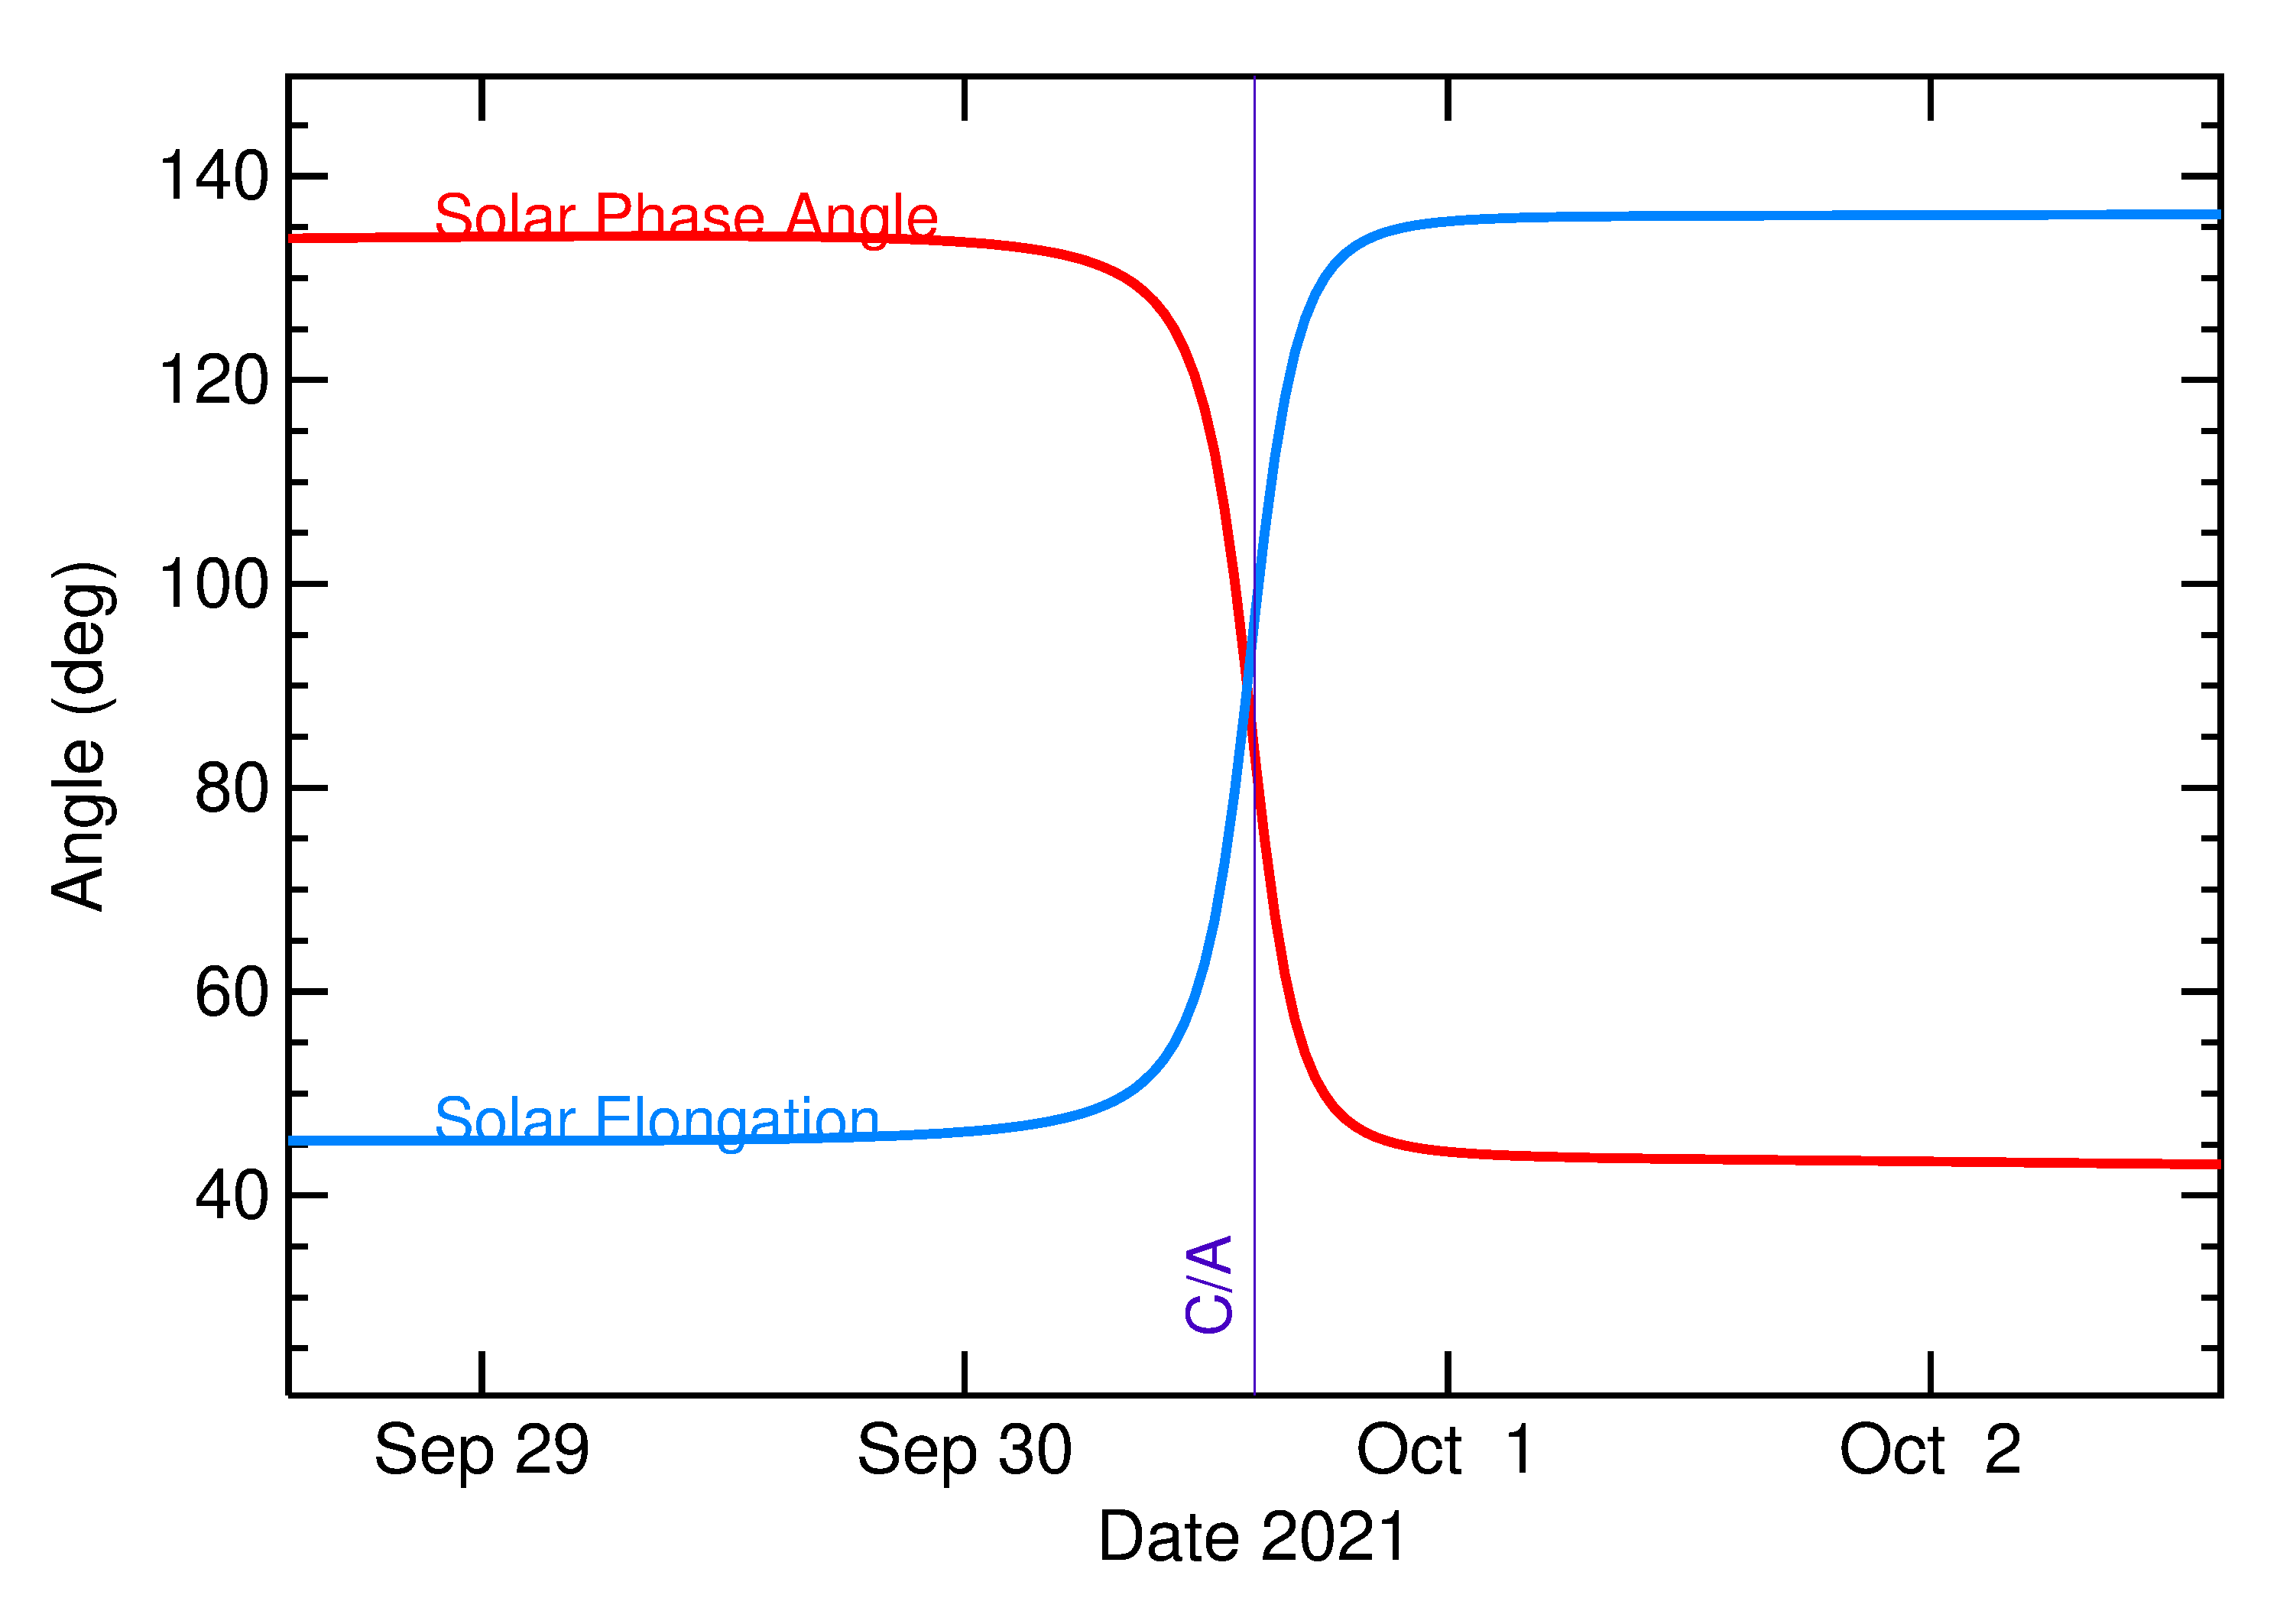 Solar Elongation and Solar Phase Angle of 2021 TT in the days around closest approach